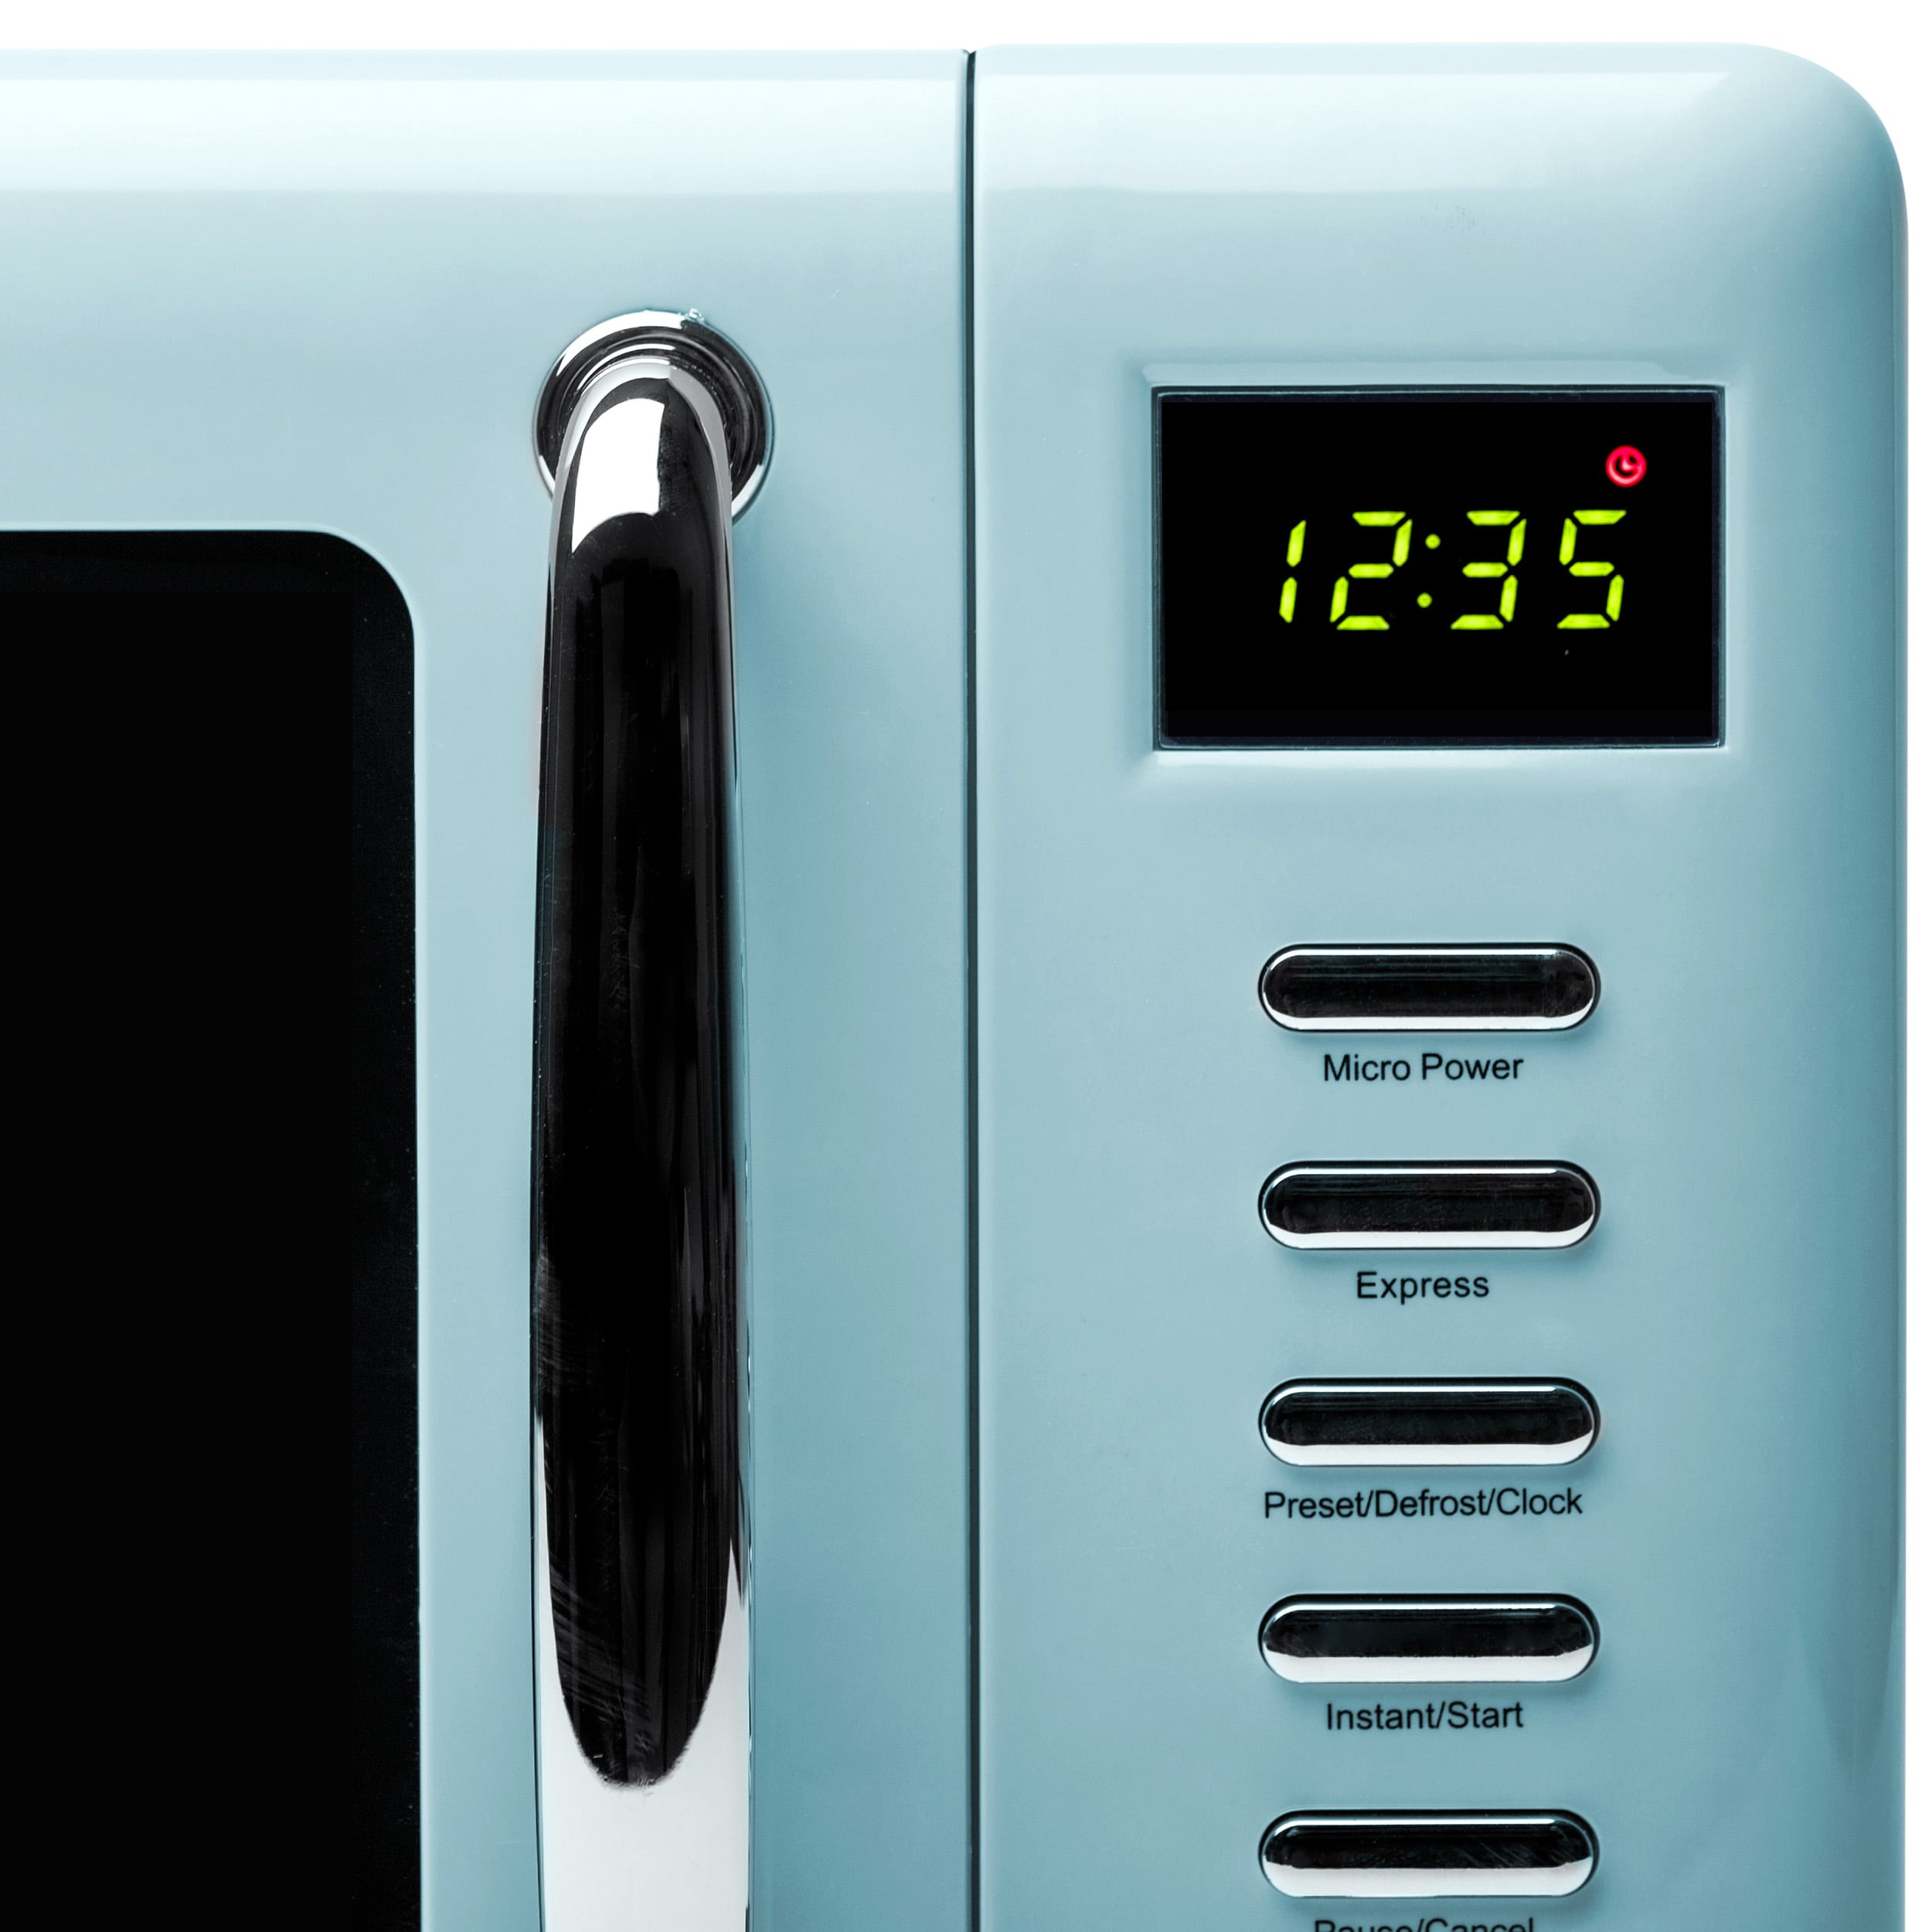 Haden 75031 Heritage Vintage Retro 0.7 Cubic Foot/20 Liter 700 Watt Countertop  Microwave Oven Kitchen Appliance With Turntable, Turquoise Blue : Target